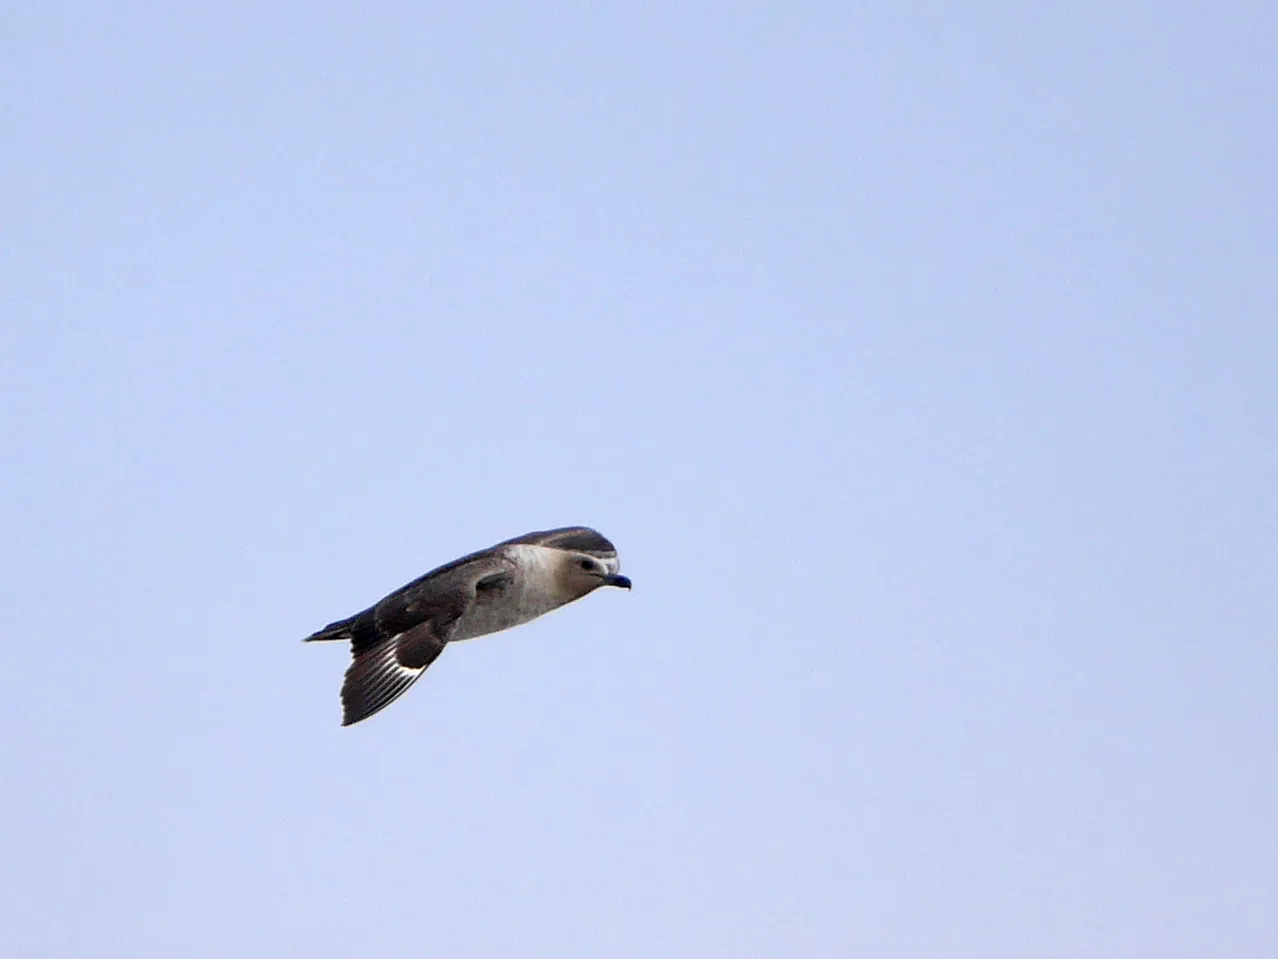 A small flying bird with a brown back and head, and a white belly and face.